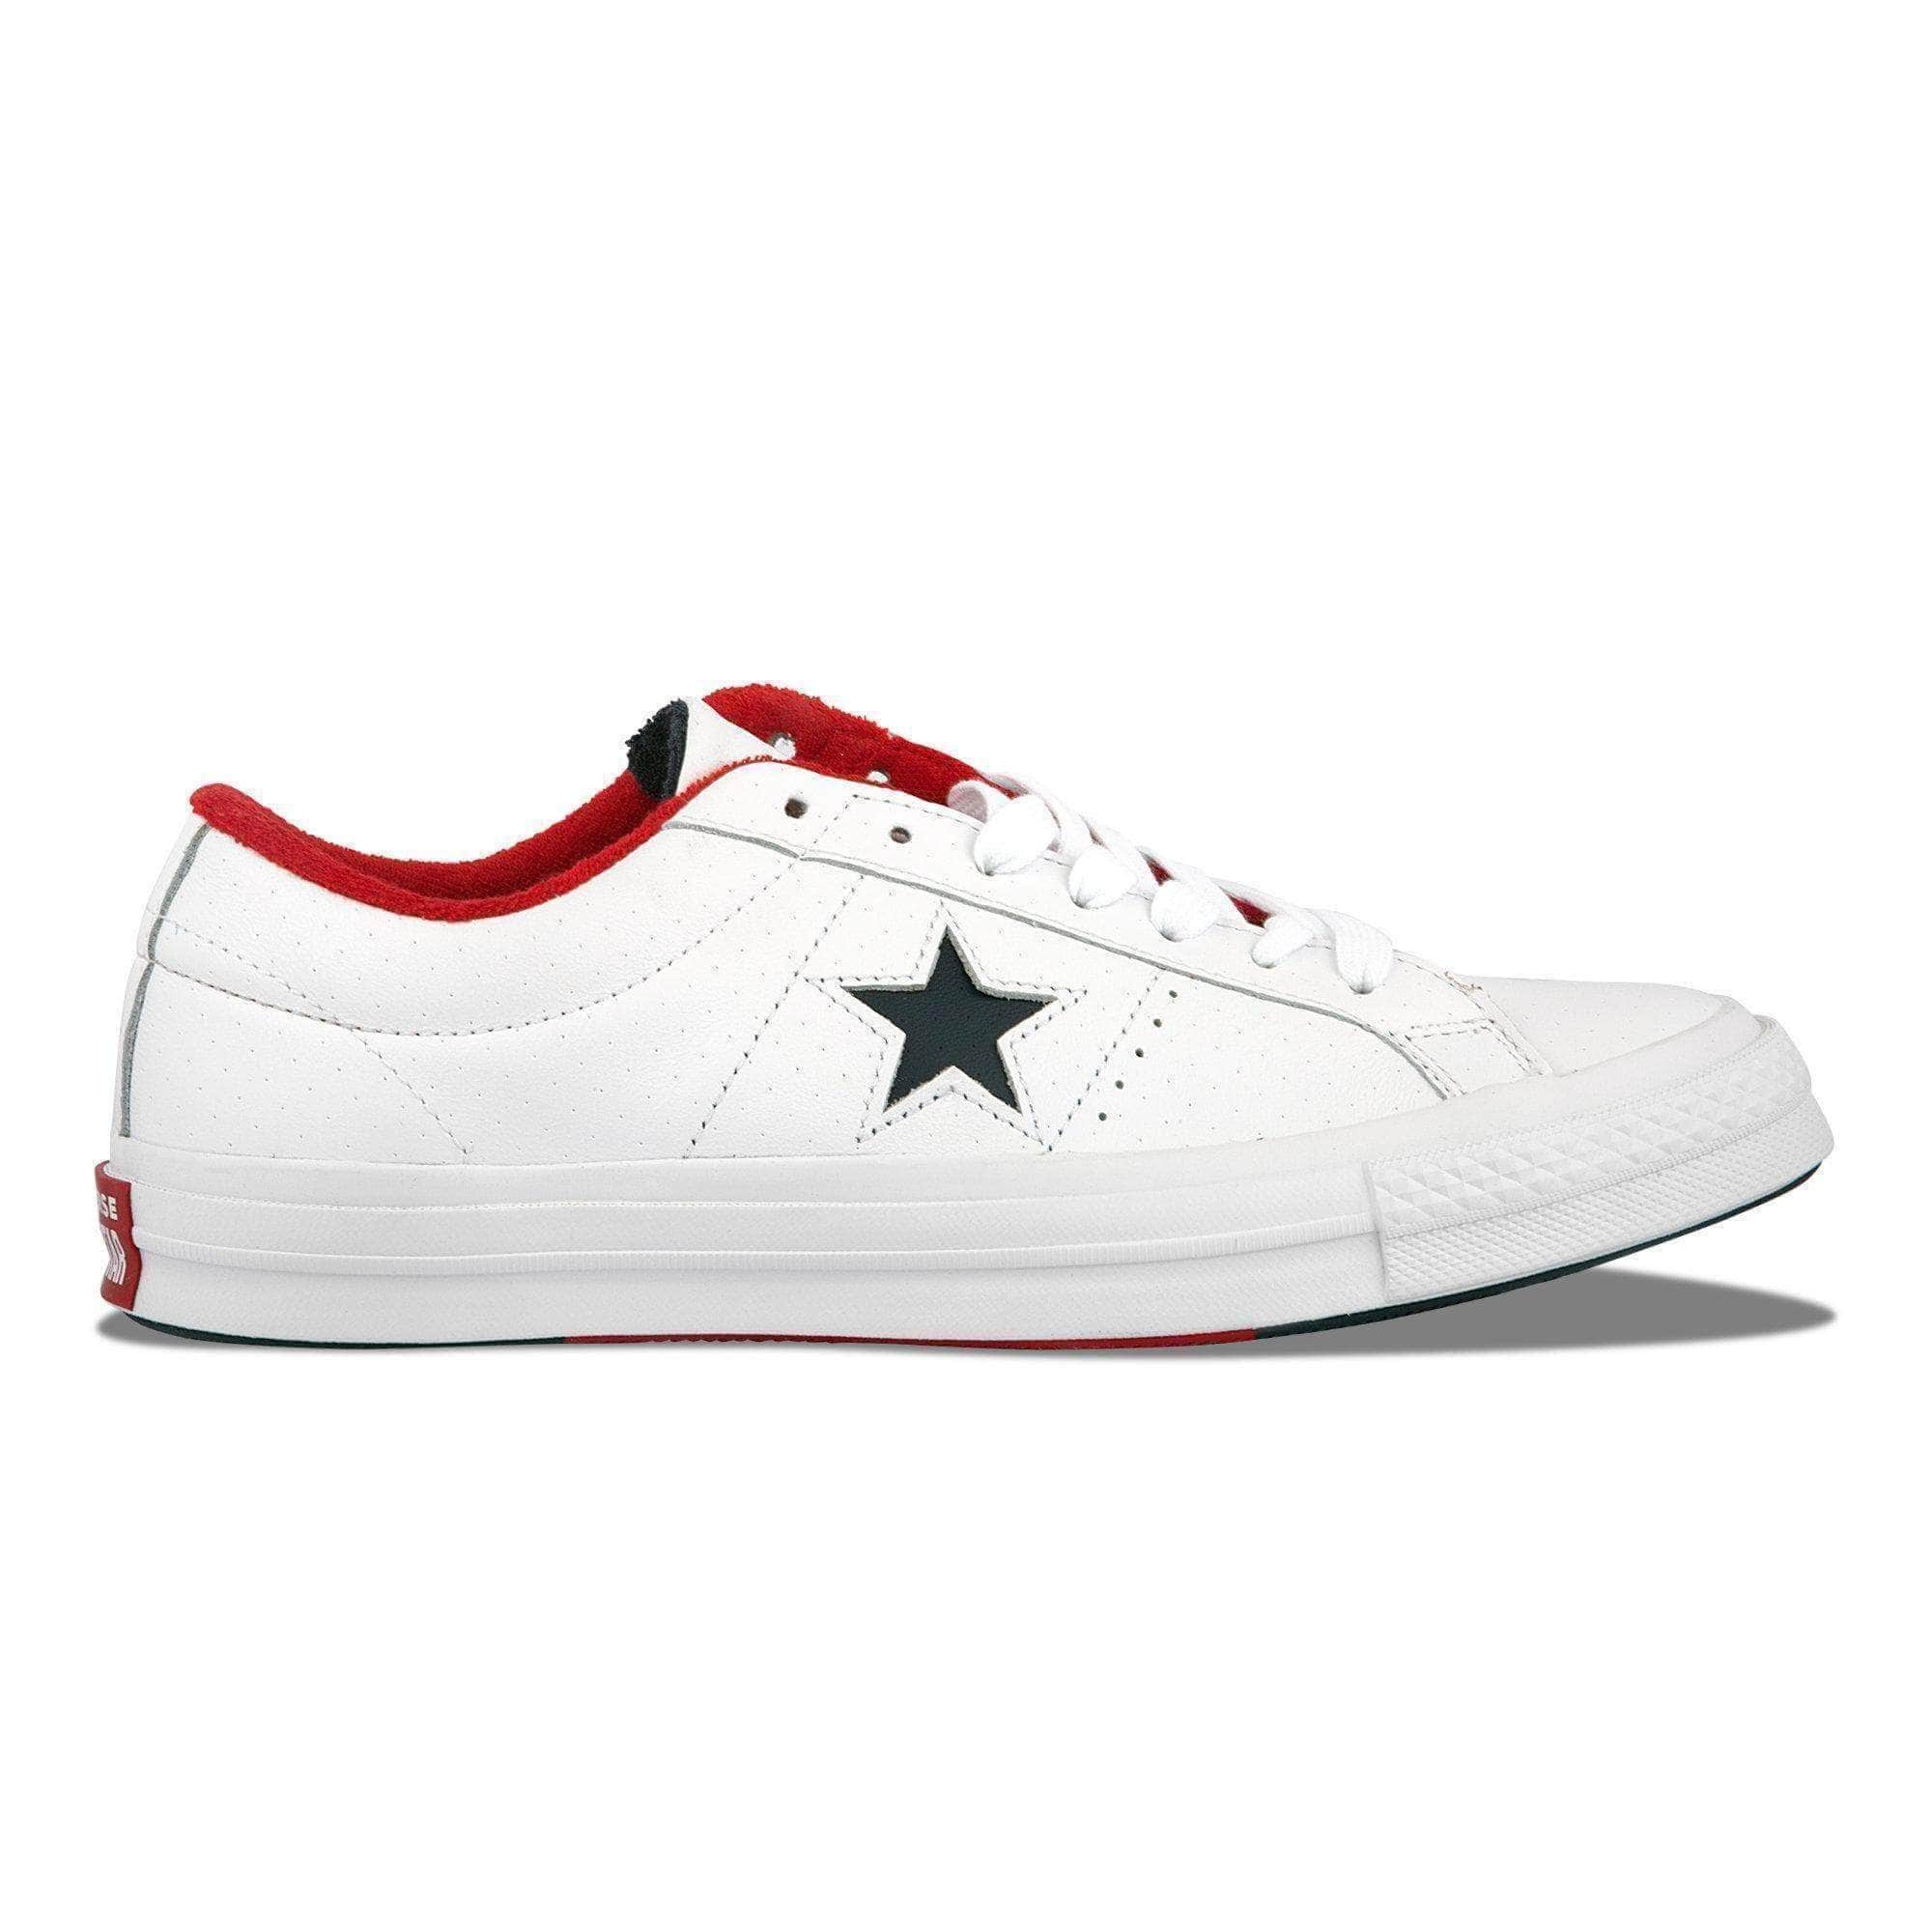 Converse One Star - Men's - GBNY